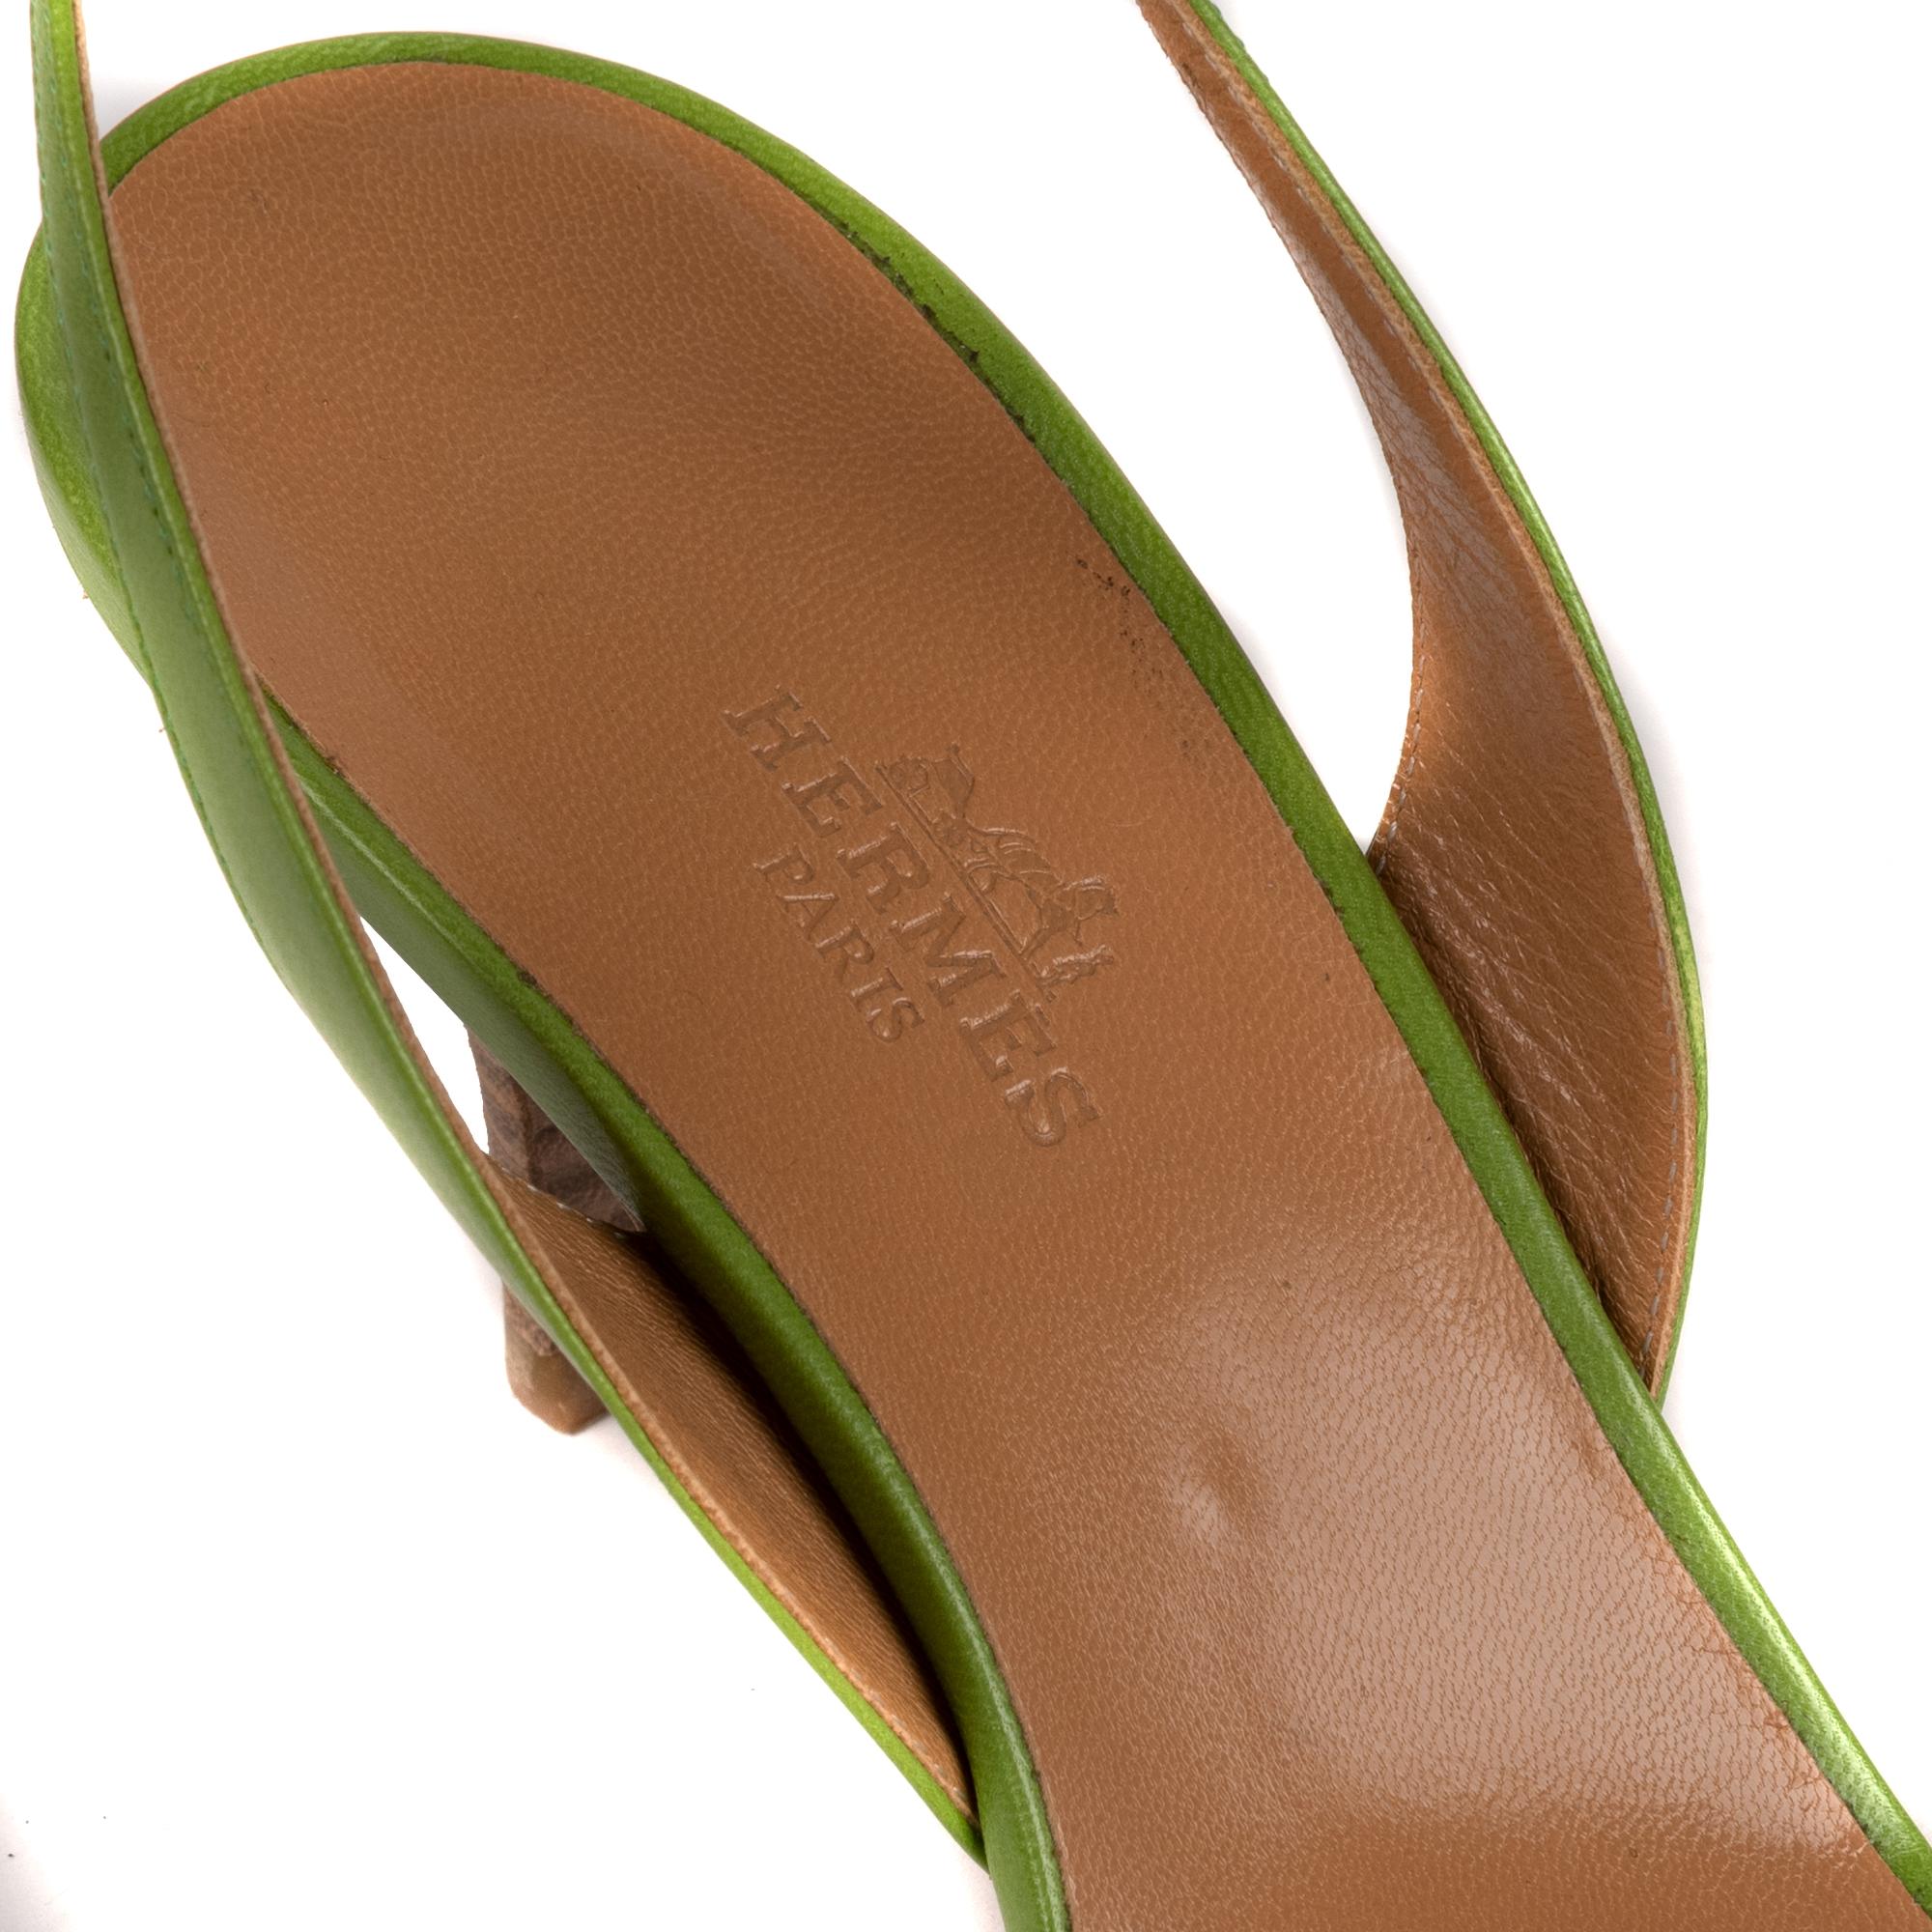 Women's Hermès Night Sandals in green leather, size 36, 5, very good condition !